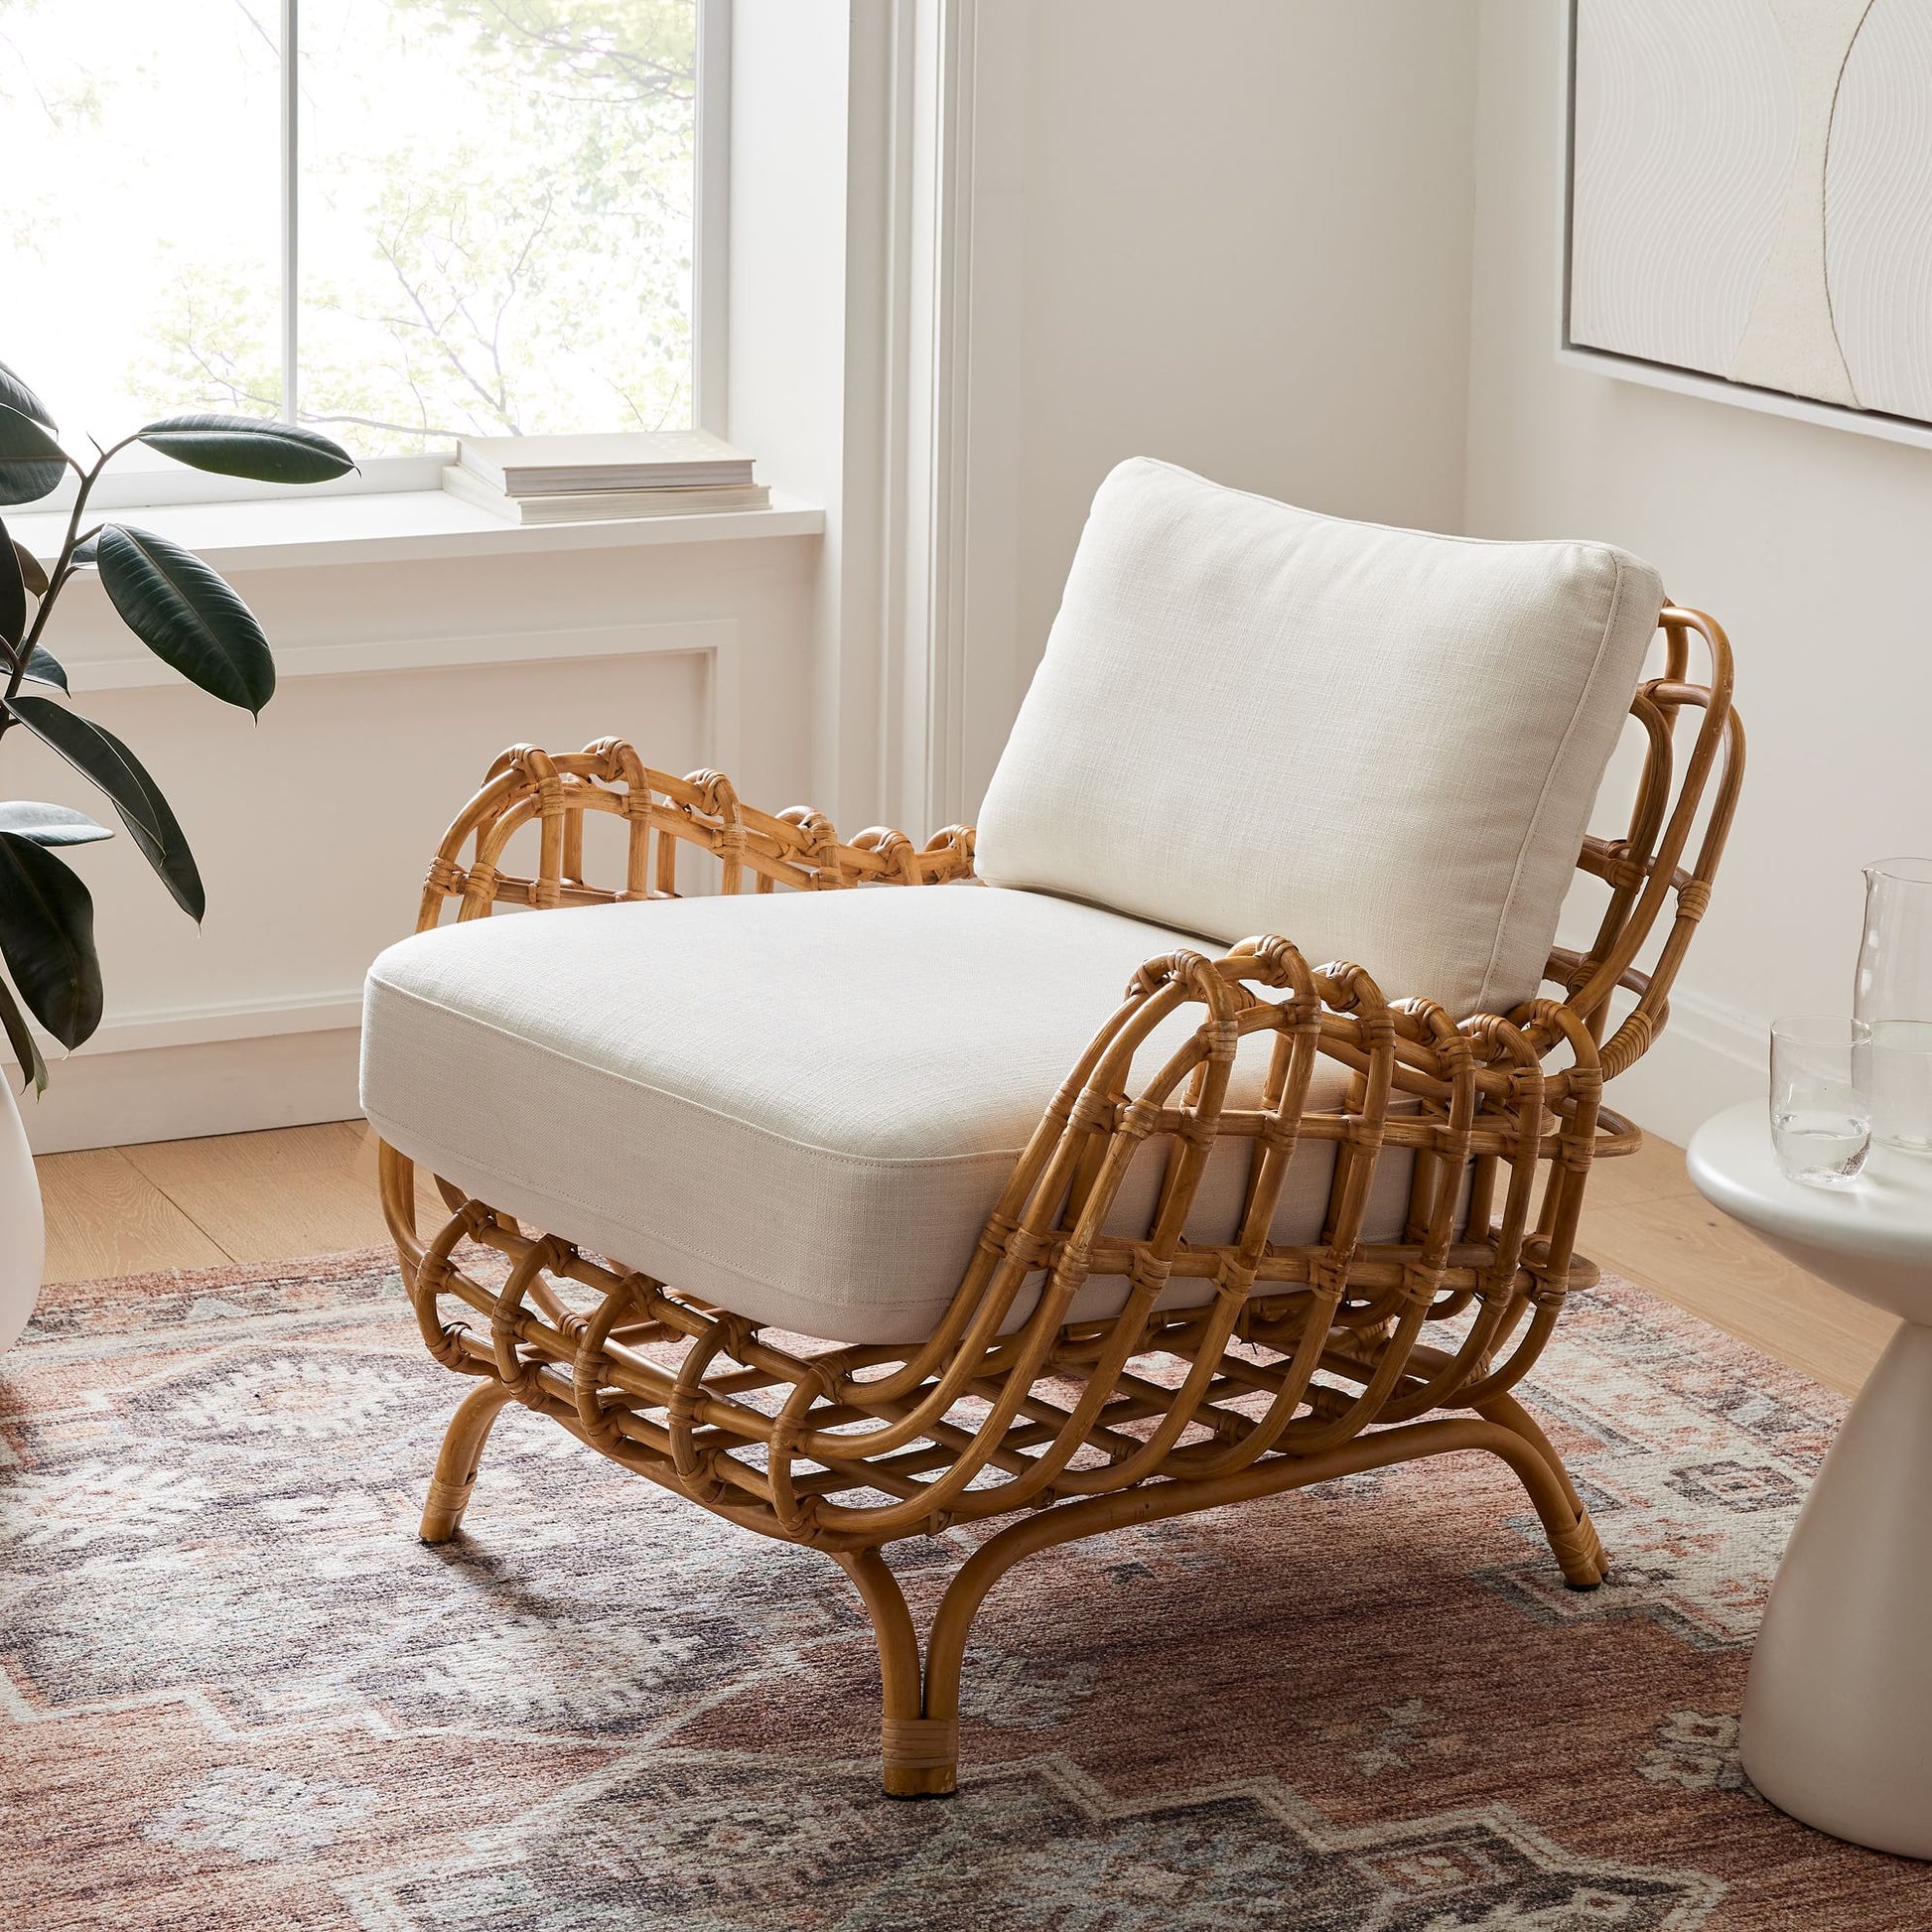 Cane chairs for Lounge | Bamboo Chairs for Living rooms- Kimaya - Akway